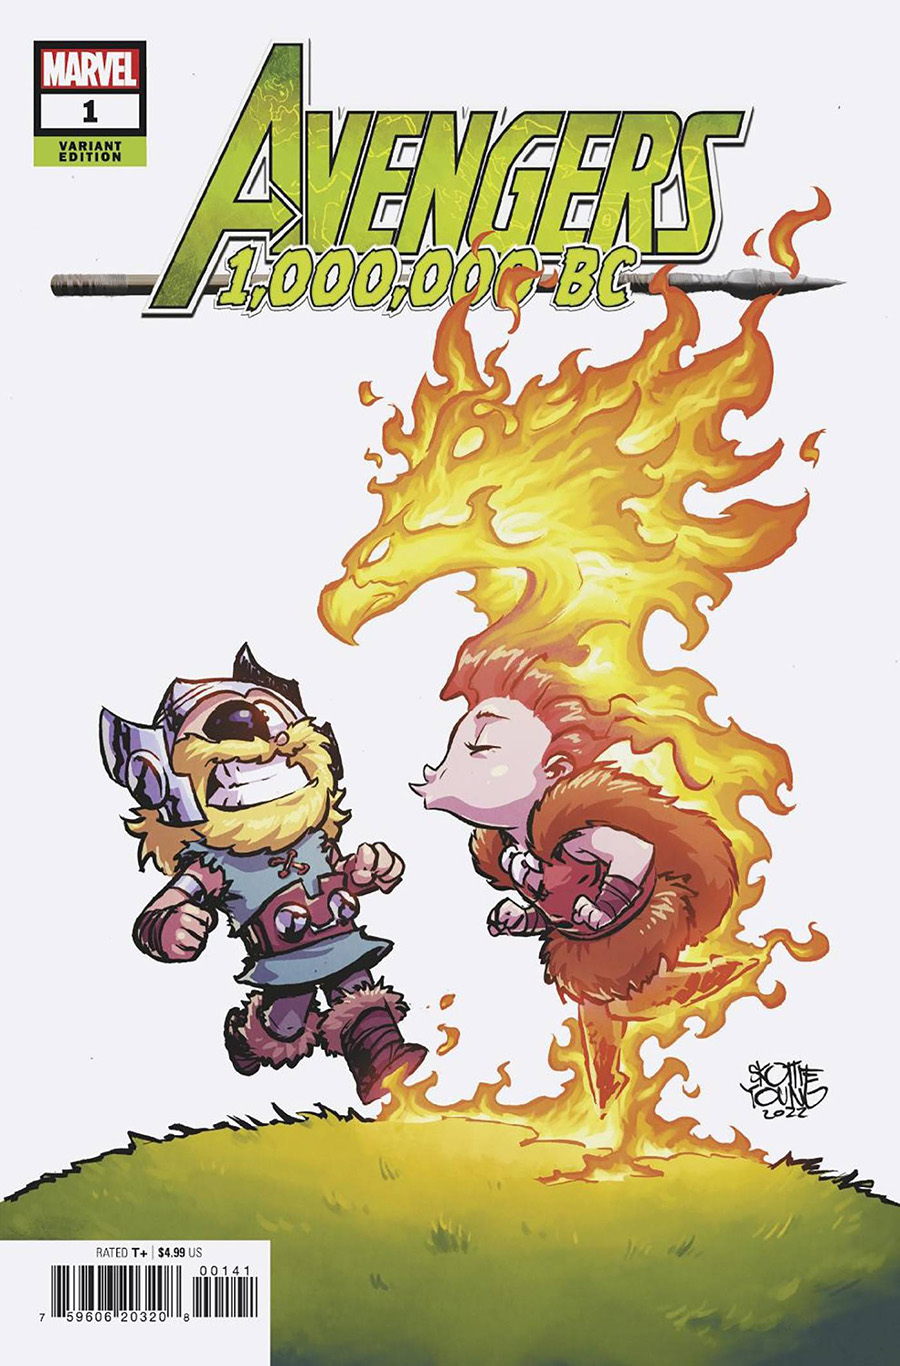 Avengers 1000000 BC #1 (One Shot) Cover C Variant Skottie Young Cover